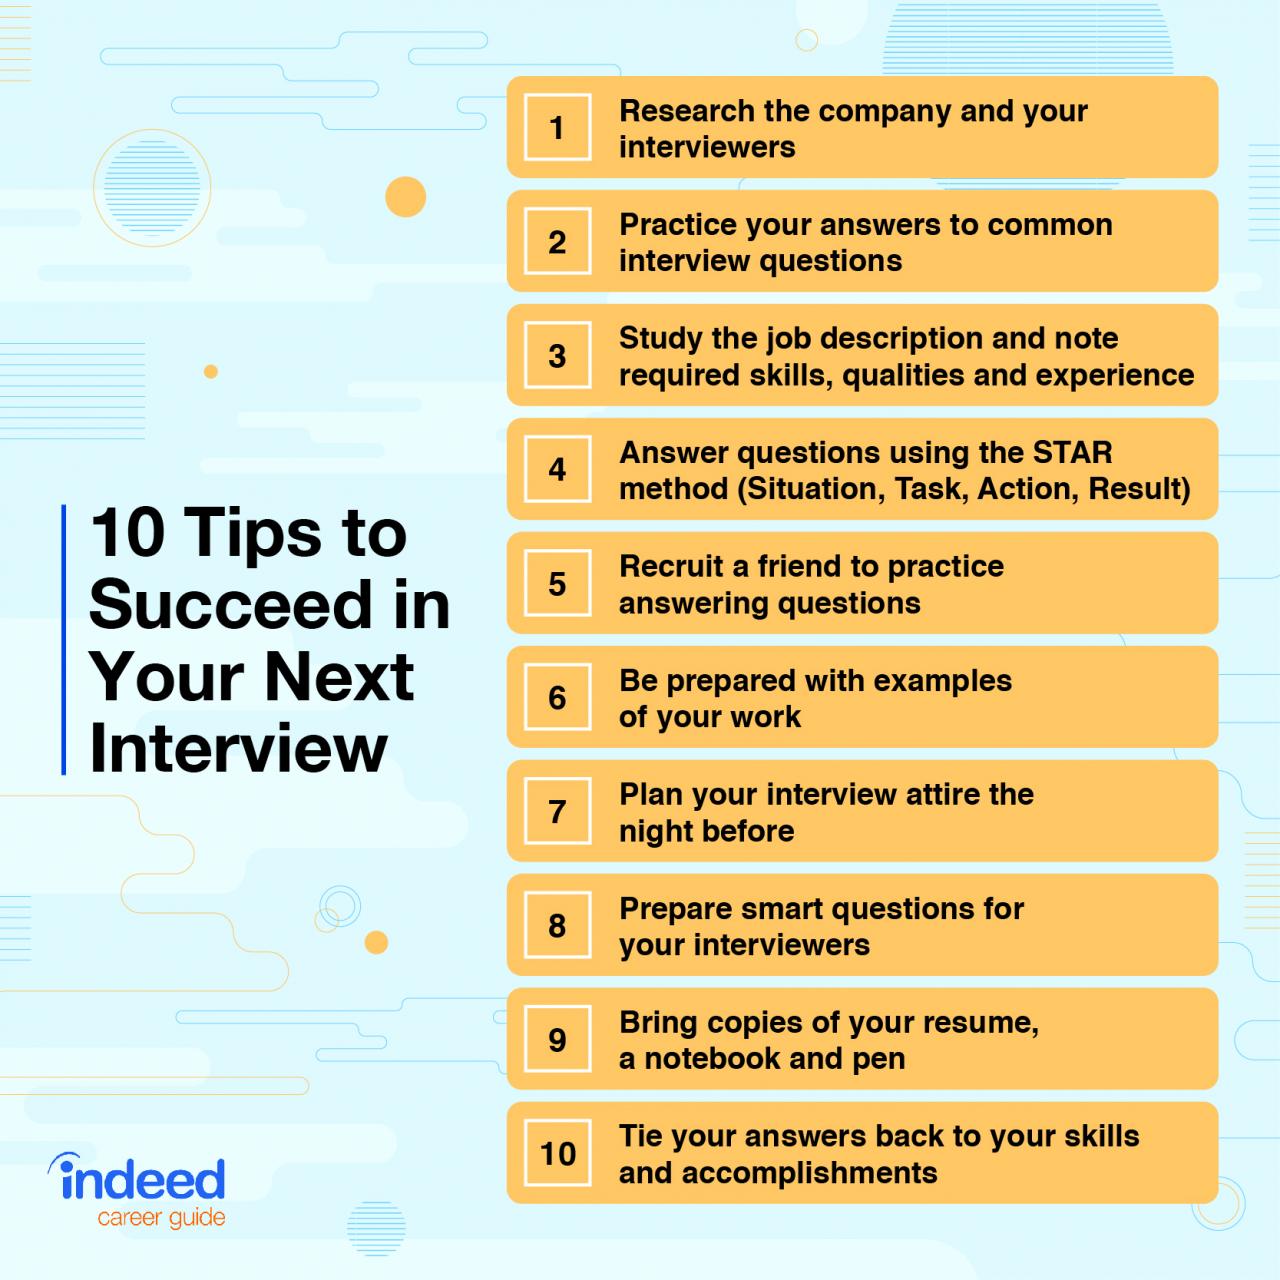 5 good questions to ask at an interview